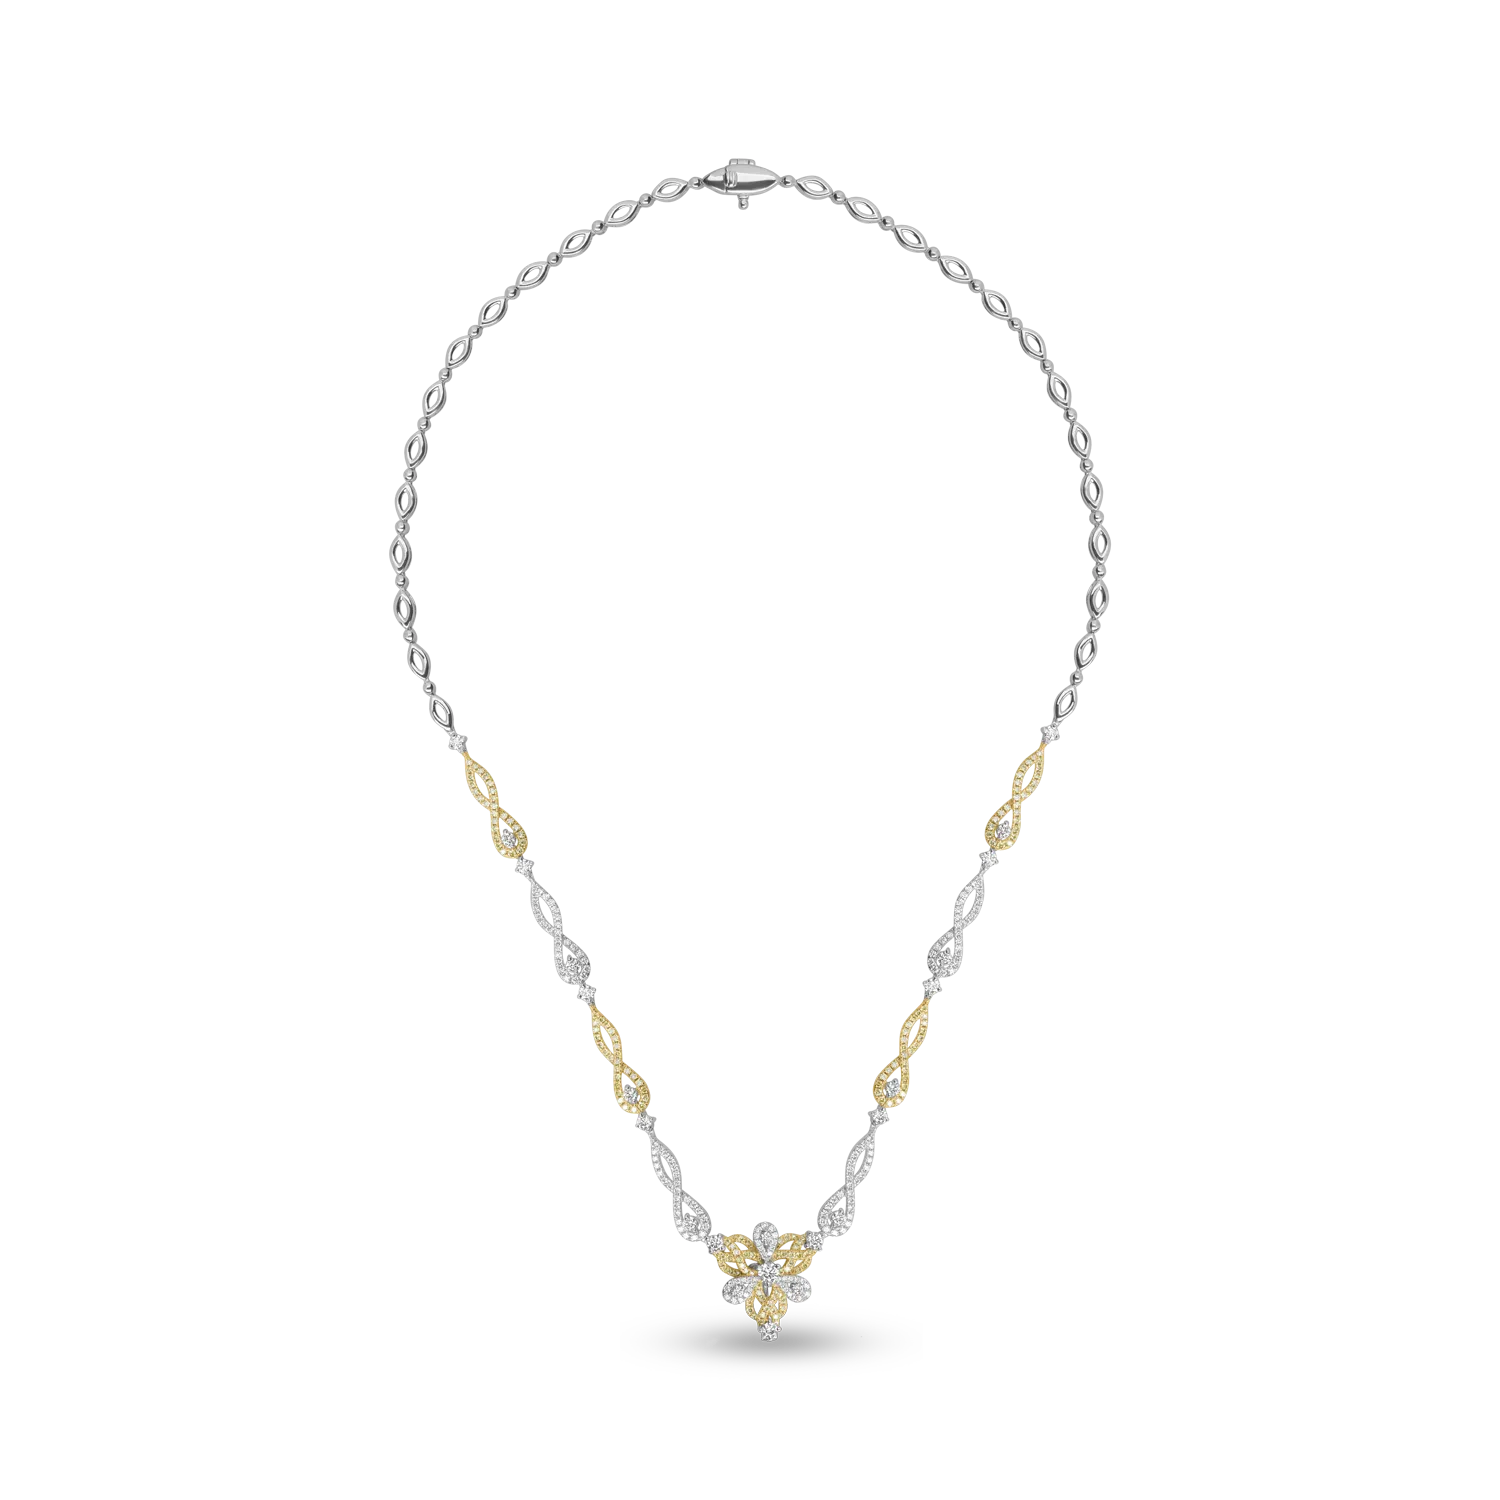 18K white-yellow gold pendant chain with 1.7ct clear diamonds and 0.81ct yellow diamonds